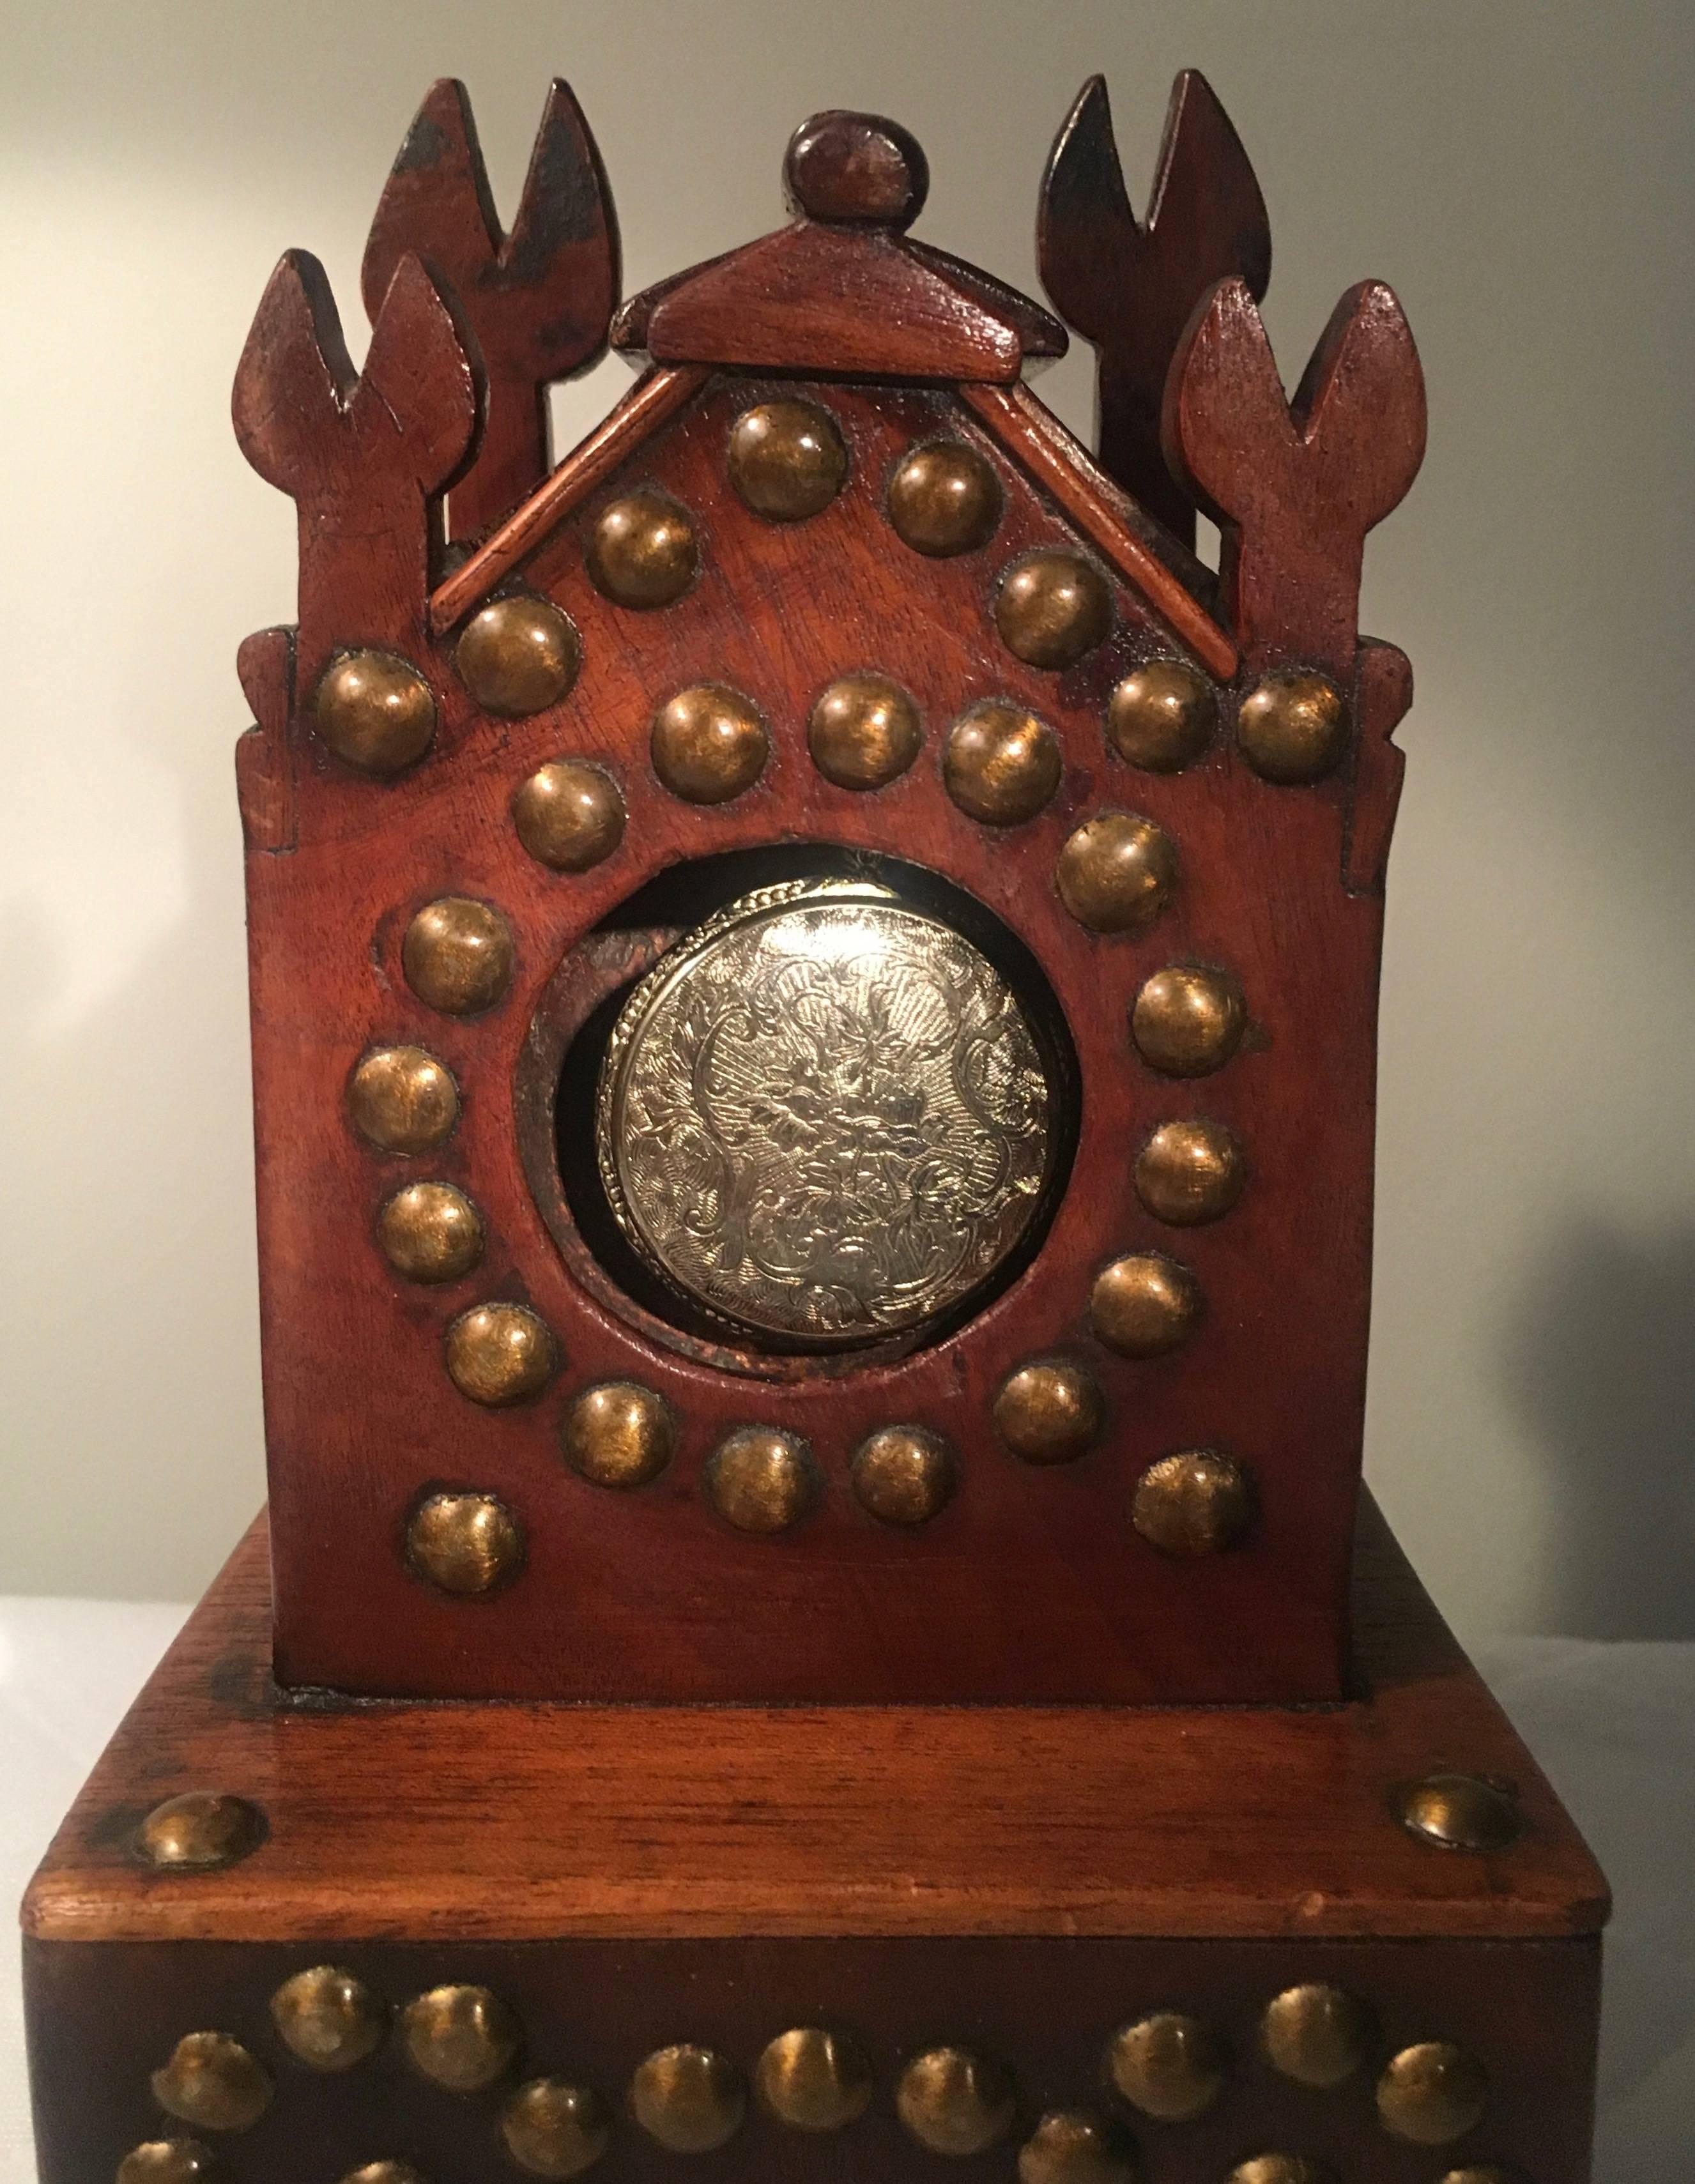 19th century Folk Art wooden and brass pocket watch holder. Unique and most certainly one-of-a-kind watch holder, made to represent an embellished clock tower representing your watch. The design and use of brass nail heads is a great way to display